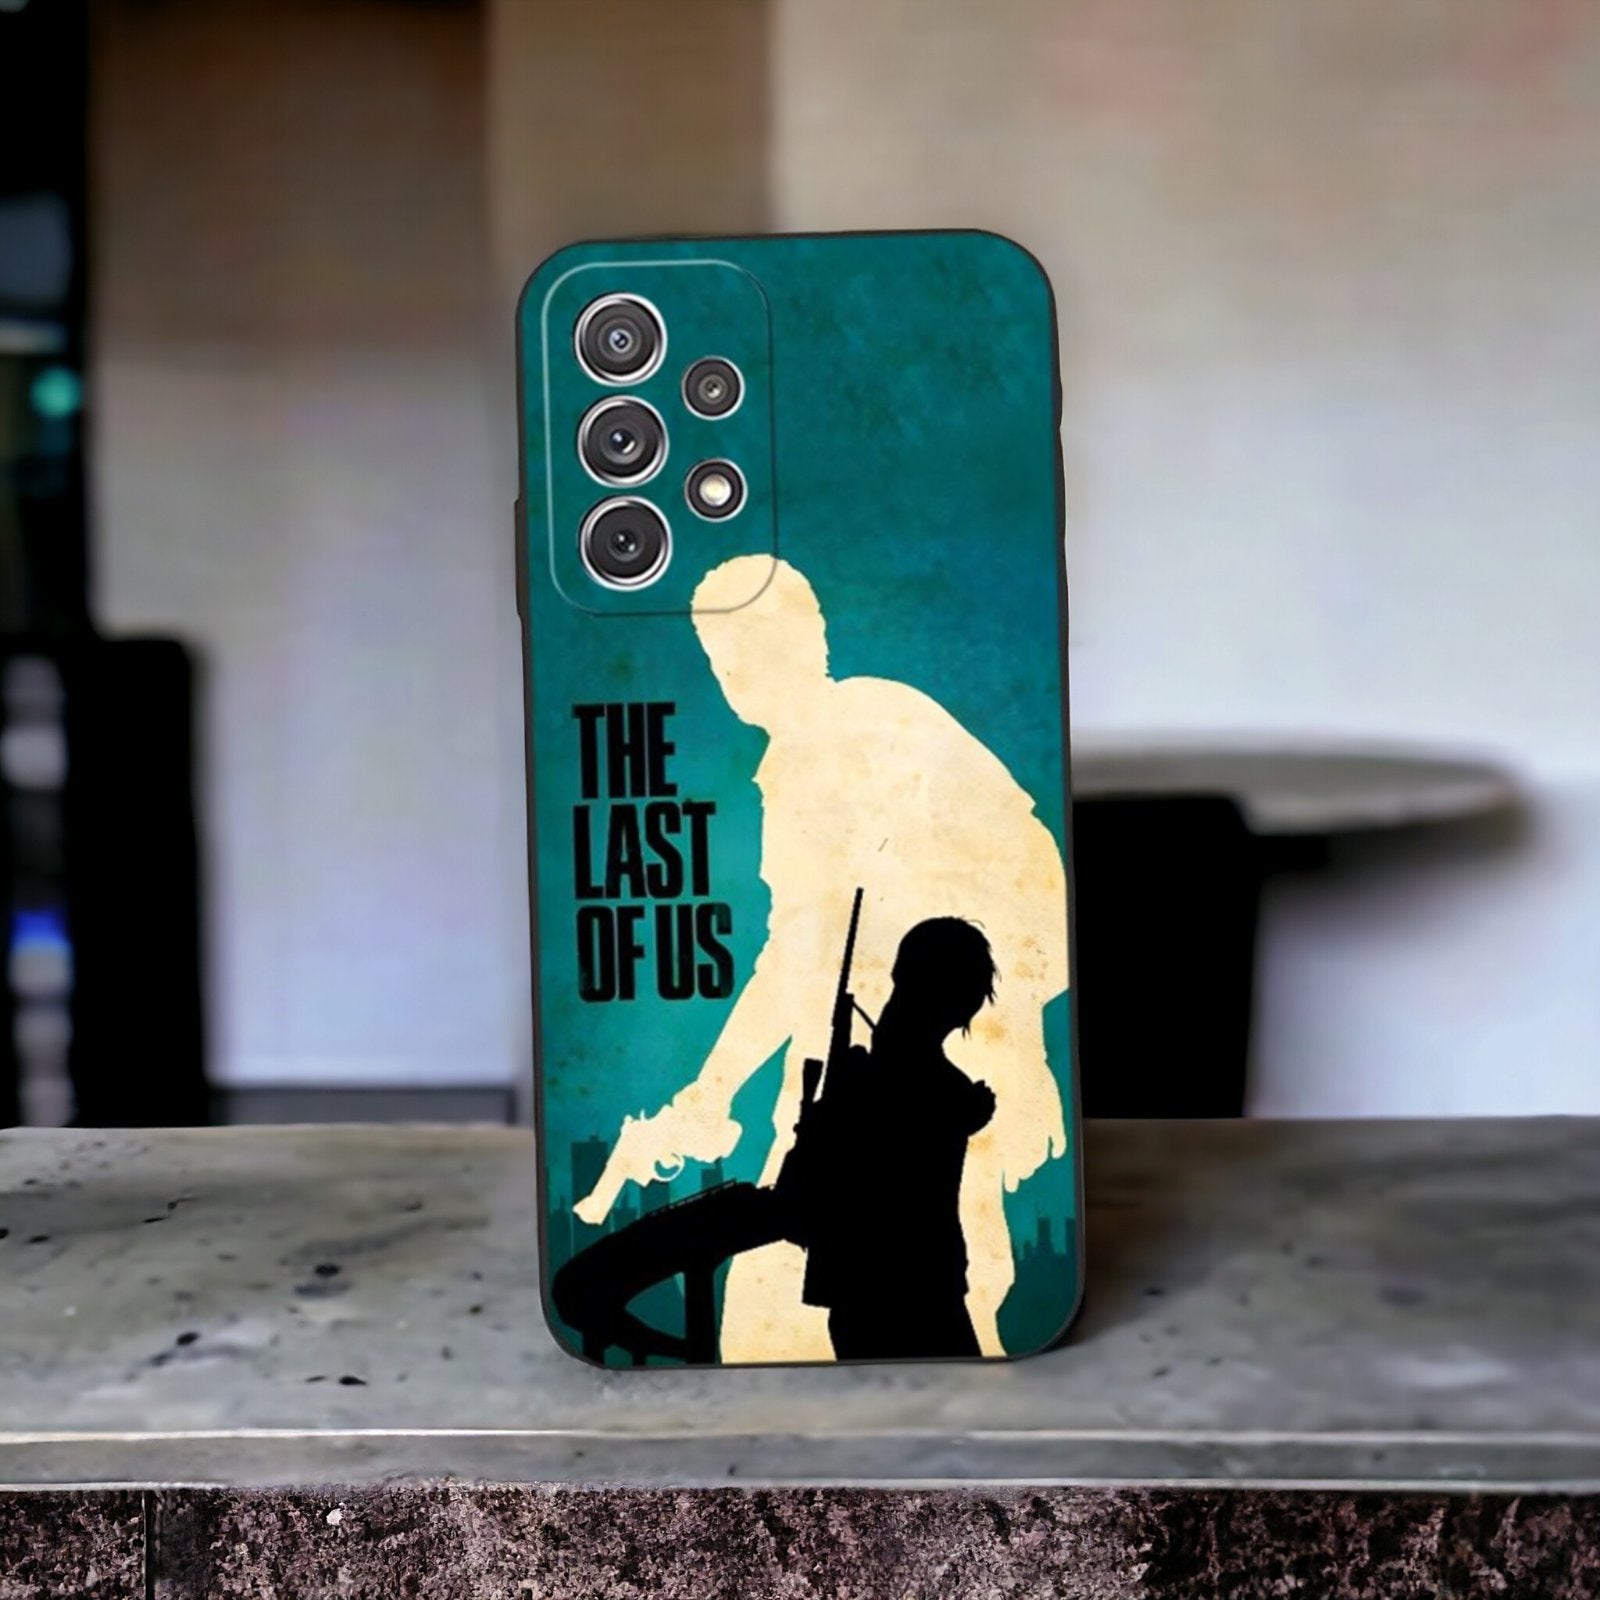 The Last Of Us Phone Cases for Samsung S & Note Series - 3 / SamsungS9 Available at 2Fast2See.co